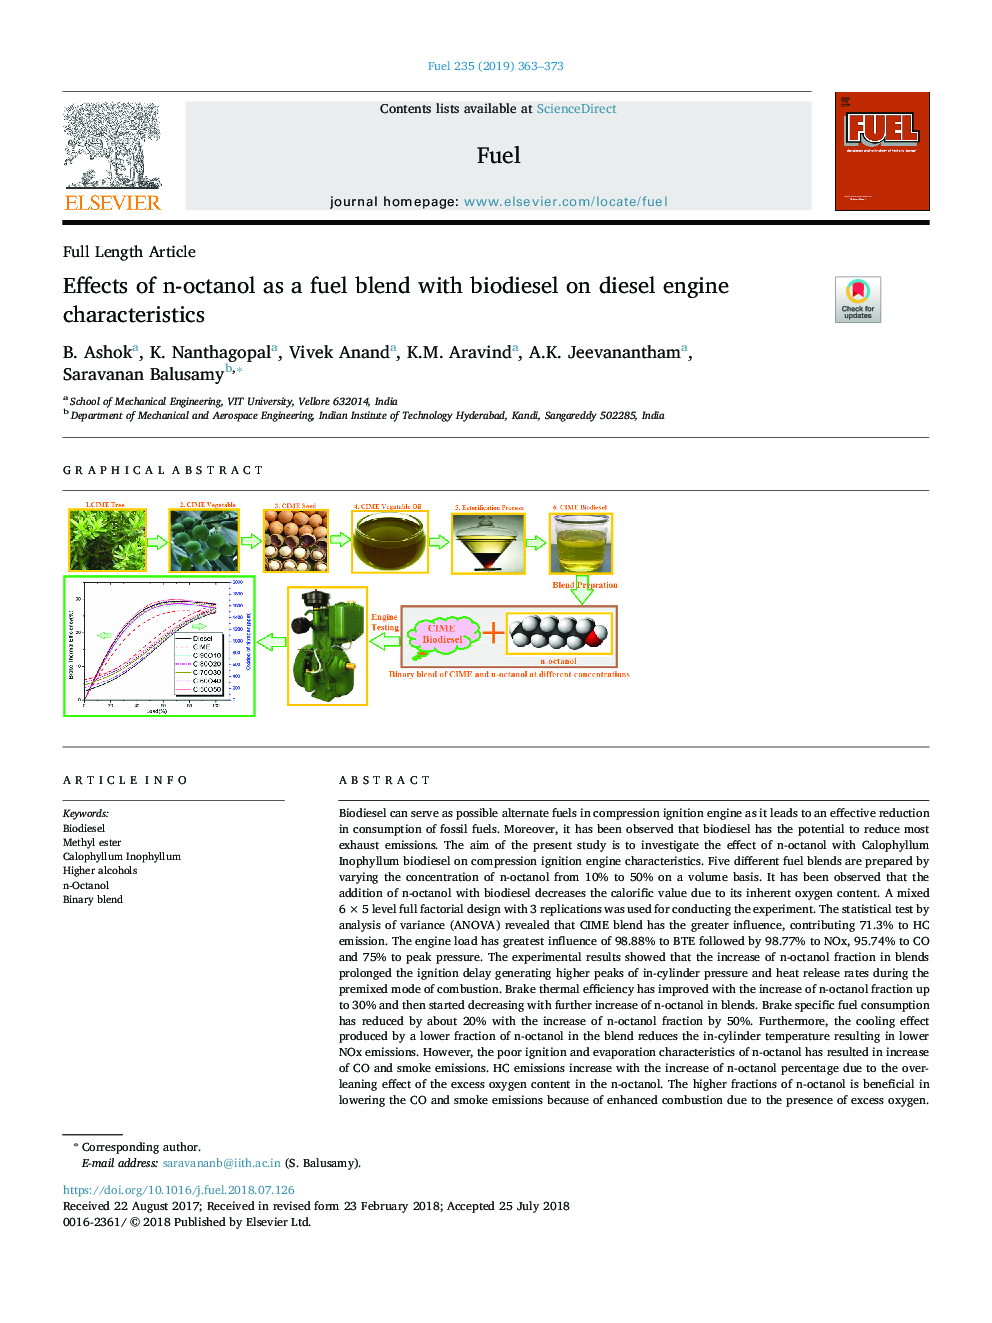 Effects of n-octanol as a fuel blend with biodiesel on diesel engine characteristics